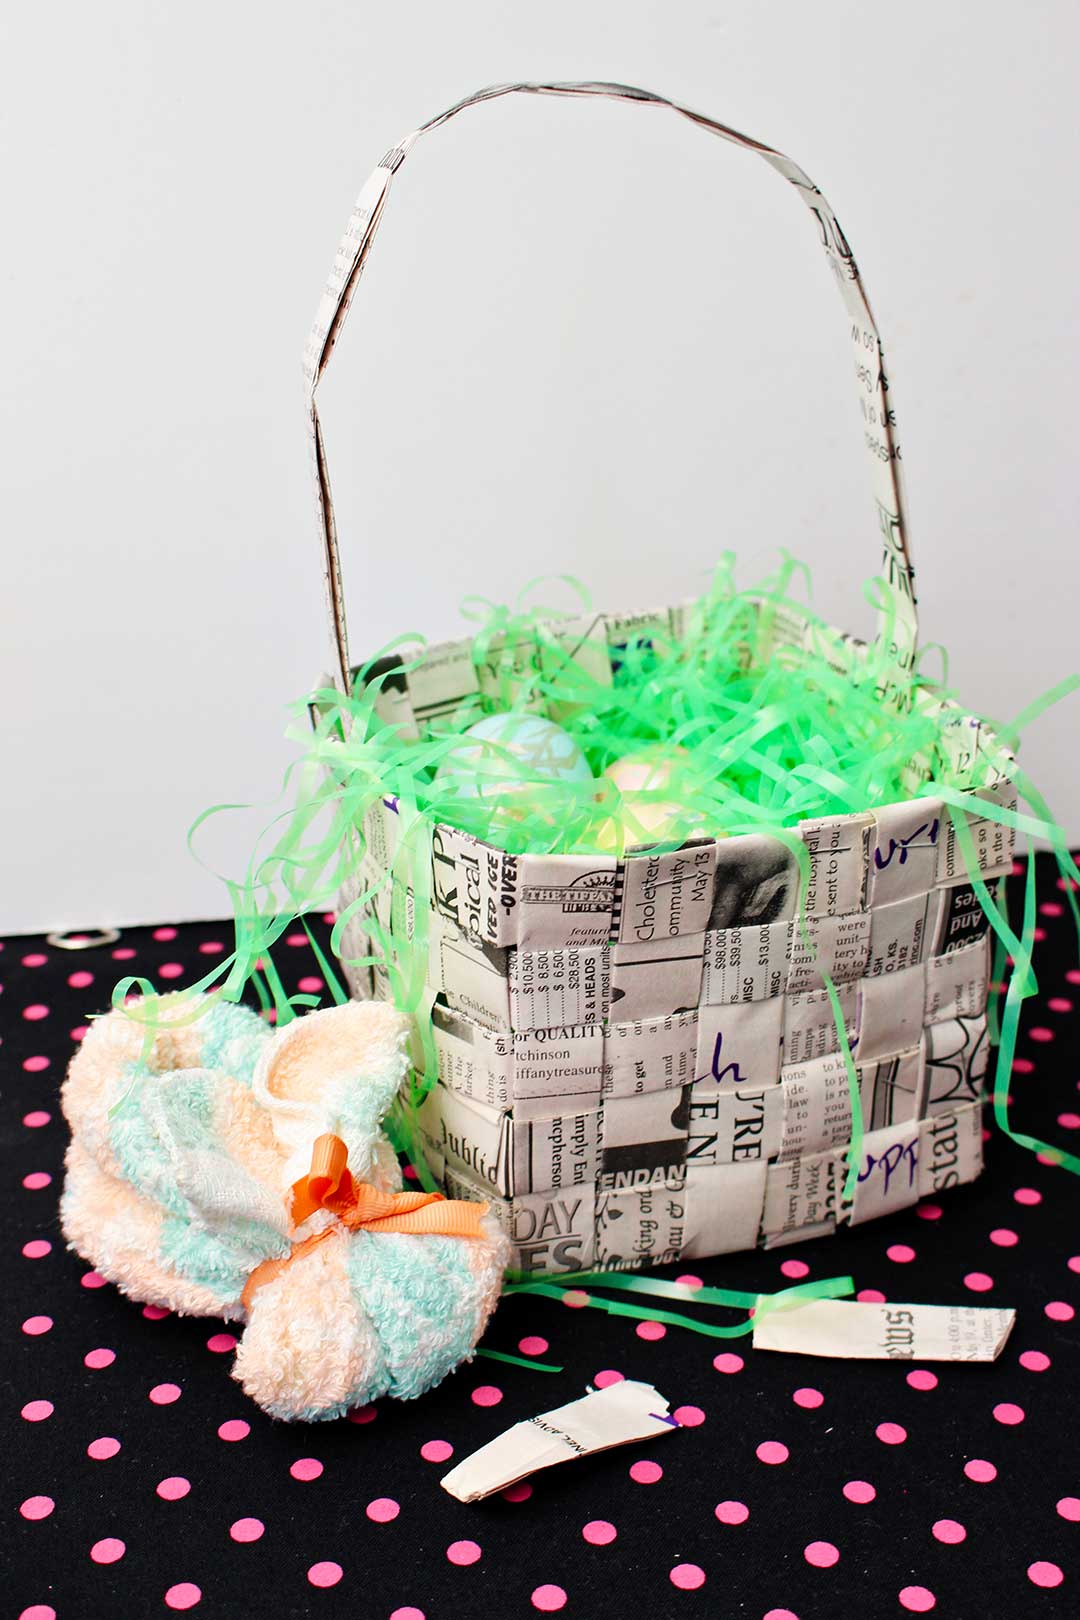 Completed woven newspaper basket filled with easter basket grass and eggs resting on pink polka dotted black fabric.